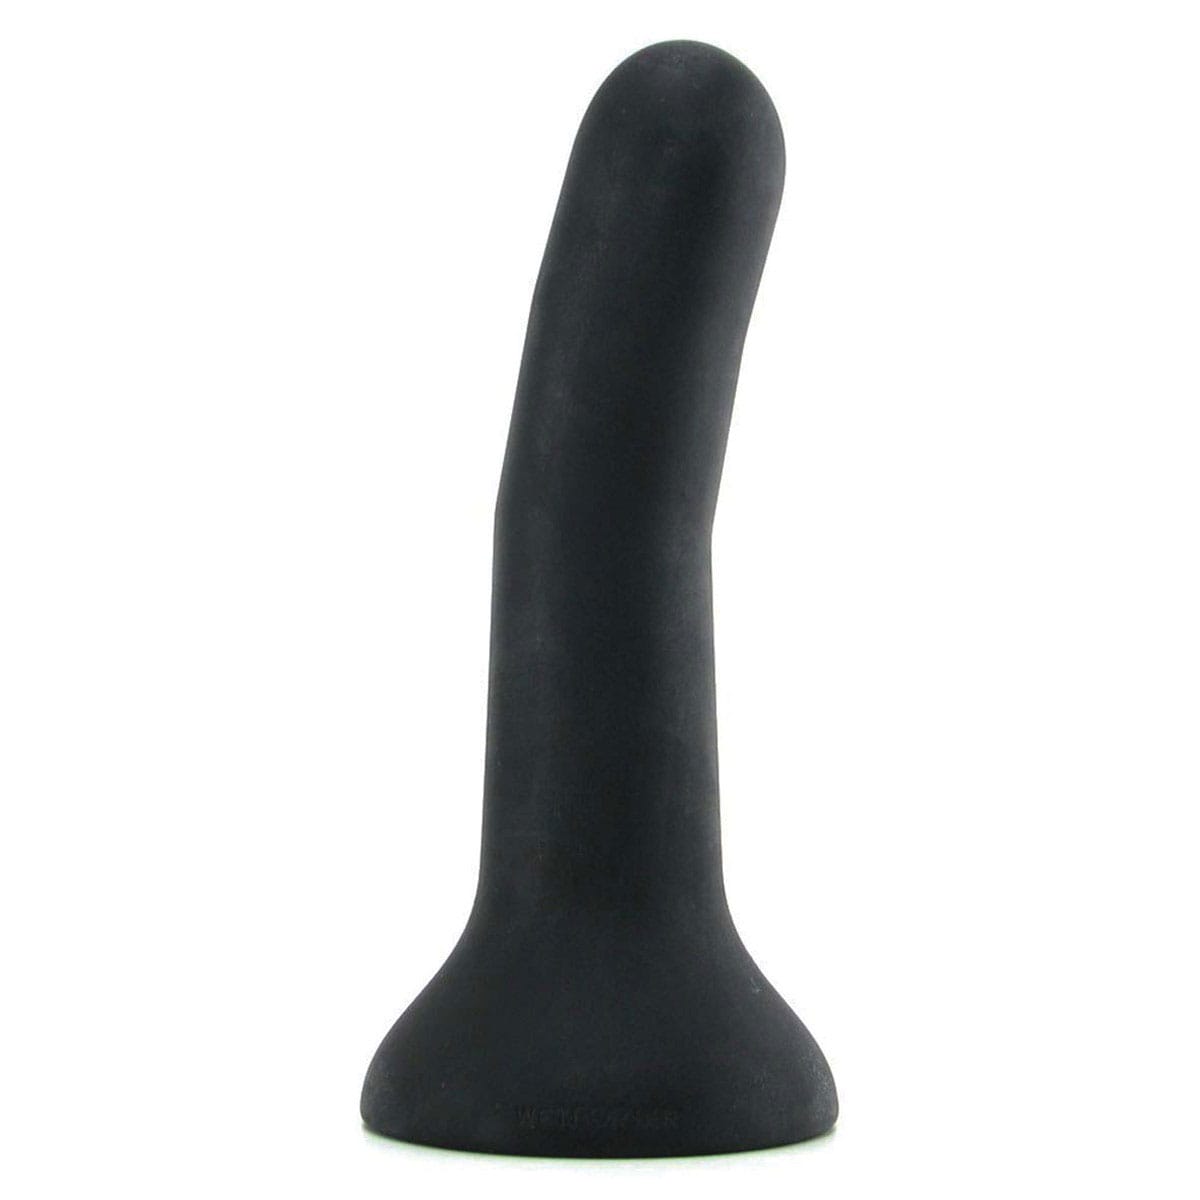 Buy Wet for Her Five Jules   Medium   Black Noir 6.5 long and  thick dildo made by Wet For Her.